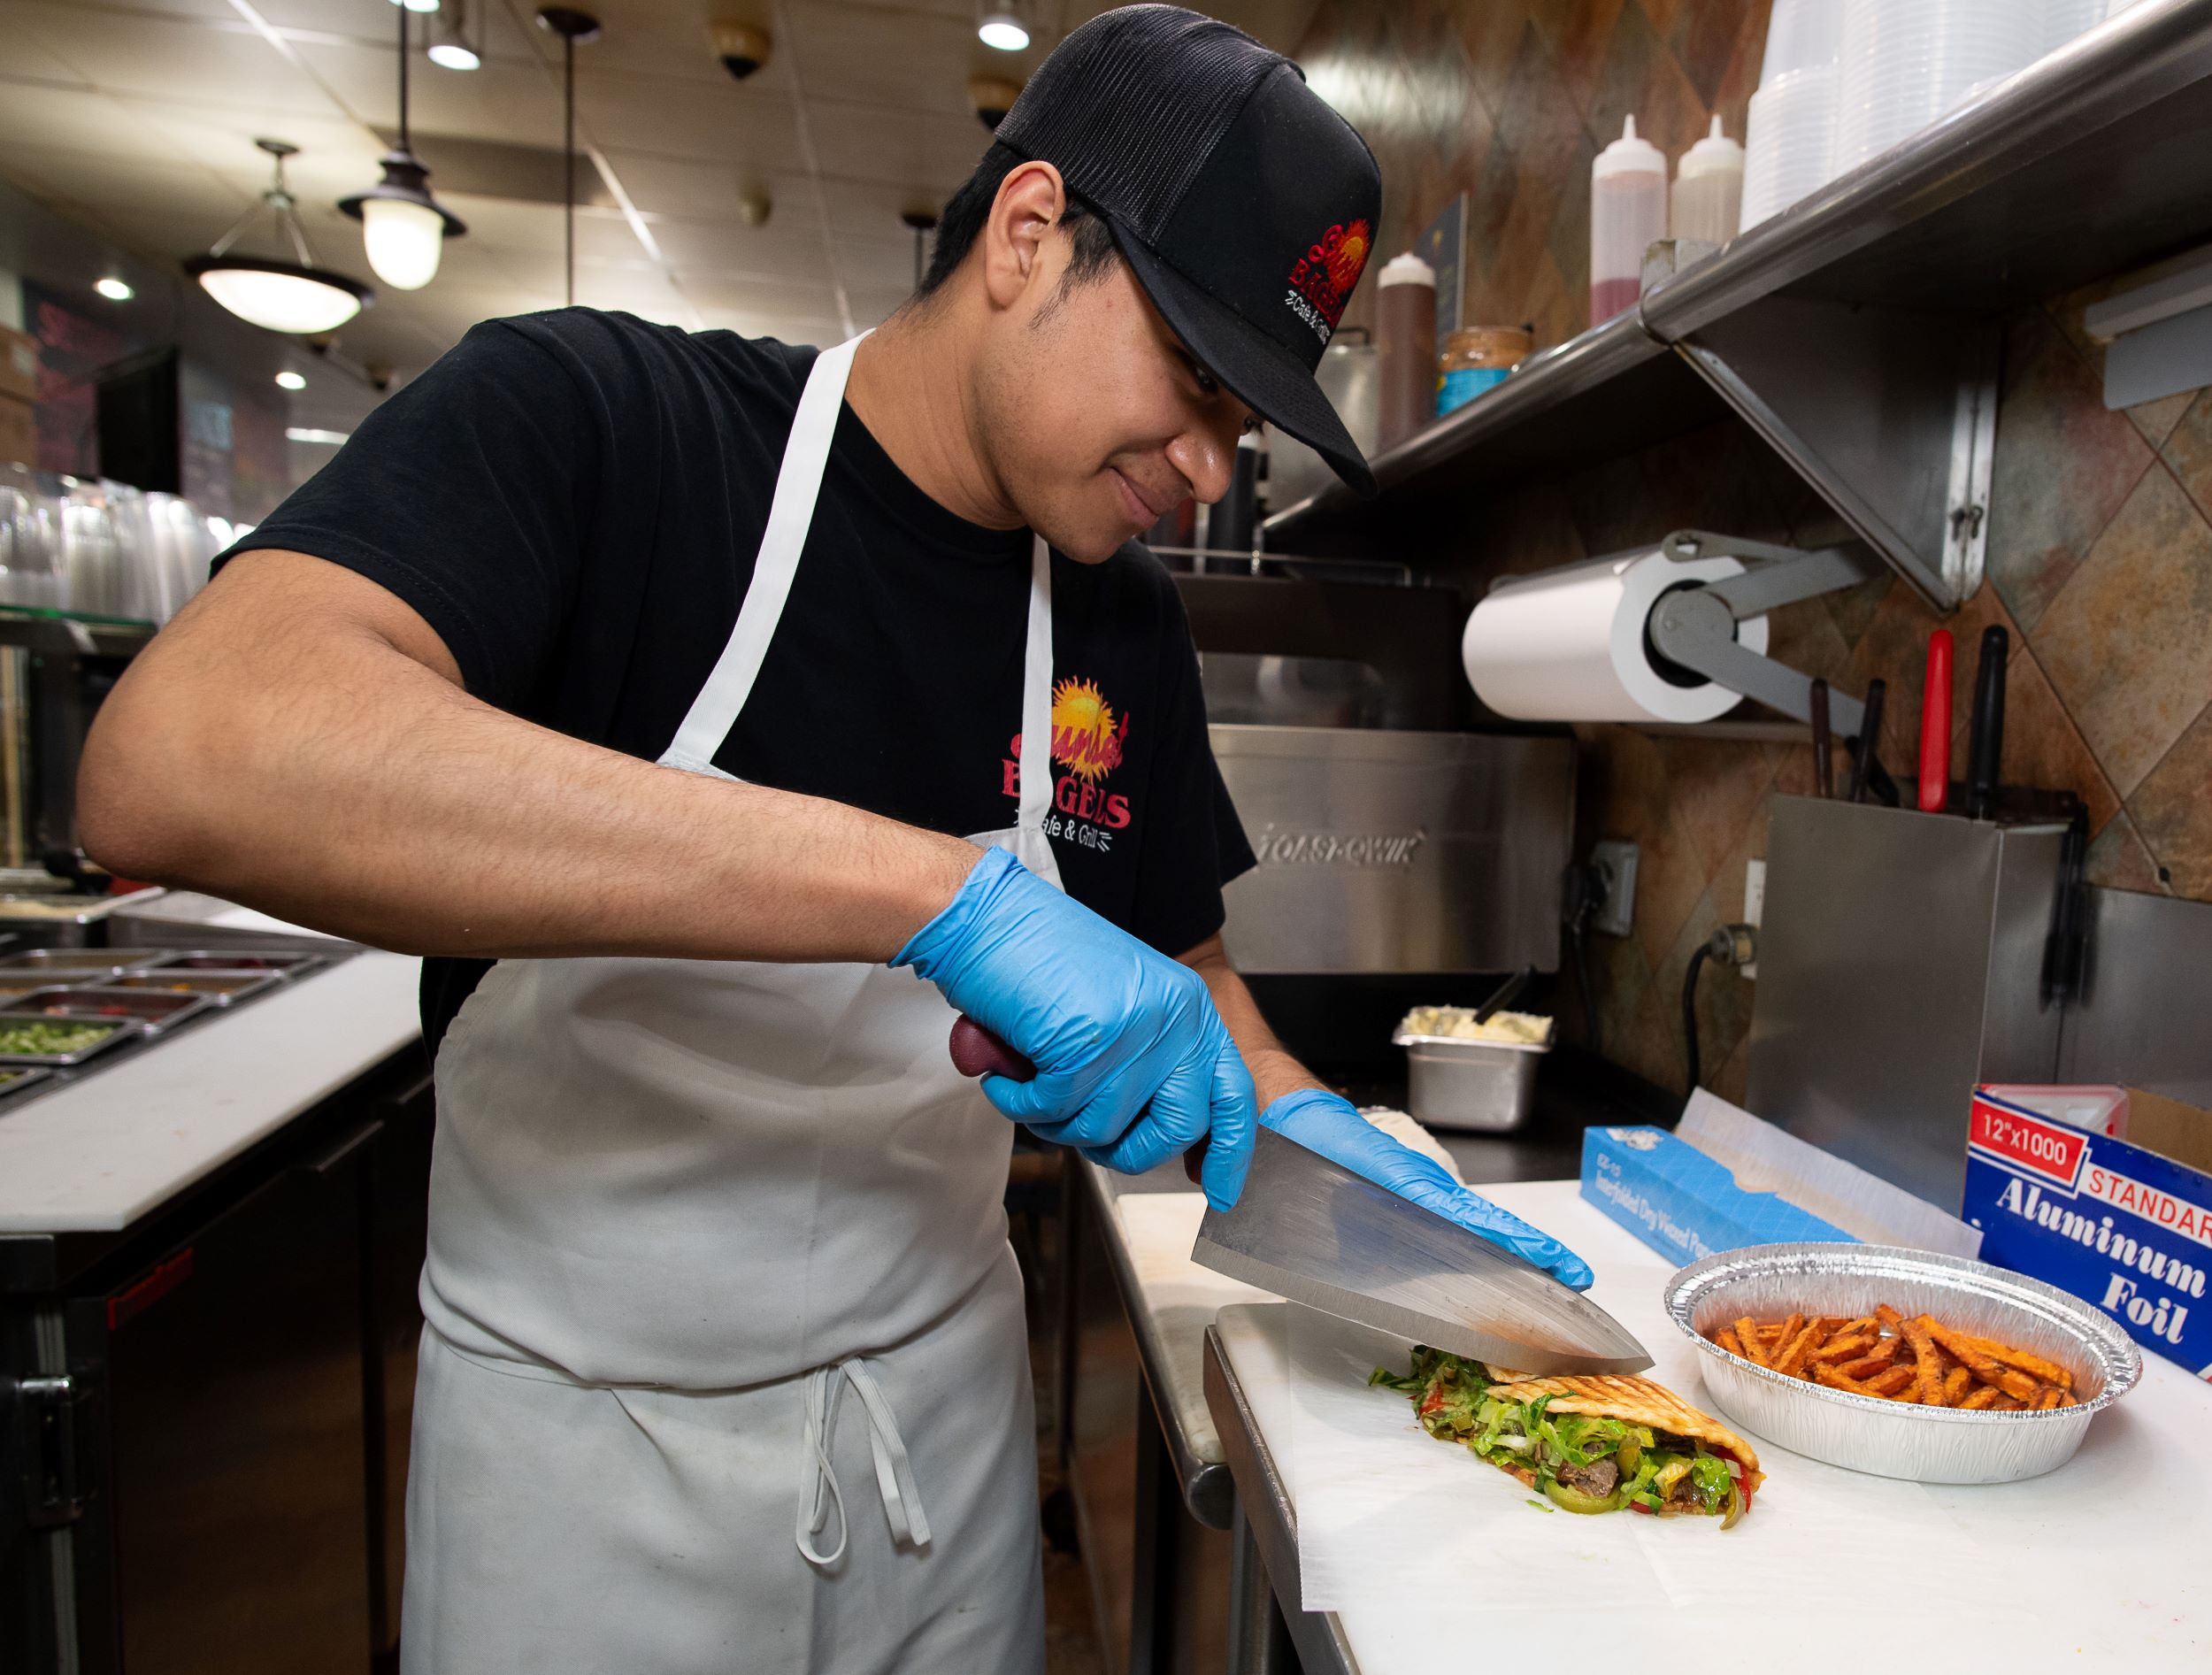 A man wearing a cap, apron, and gloves prepares food in a kitchen, smiling as he slices a wrap with a knife, with a bowl of salad and sweet potato fries nearby.